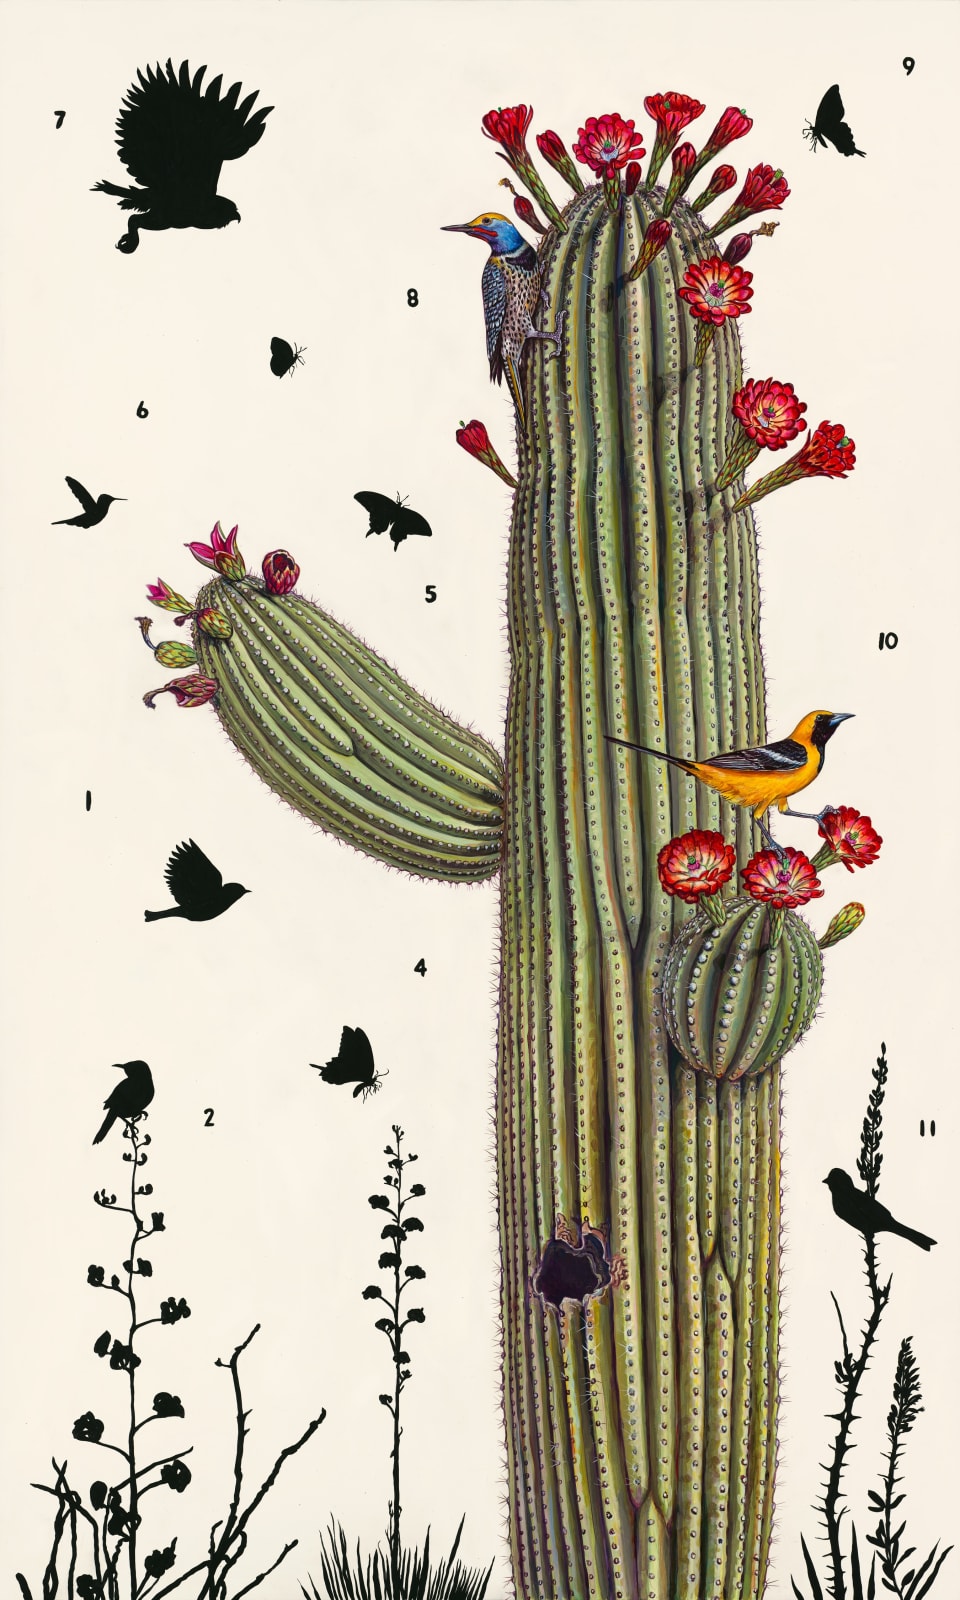 James Prosek Sonoran Desert No. 1 (Study), 2022 Watercolor, gouache, & graphite on paper 22.5 by 30 inches